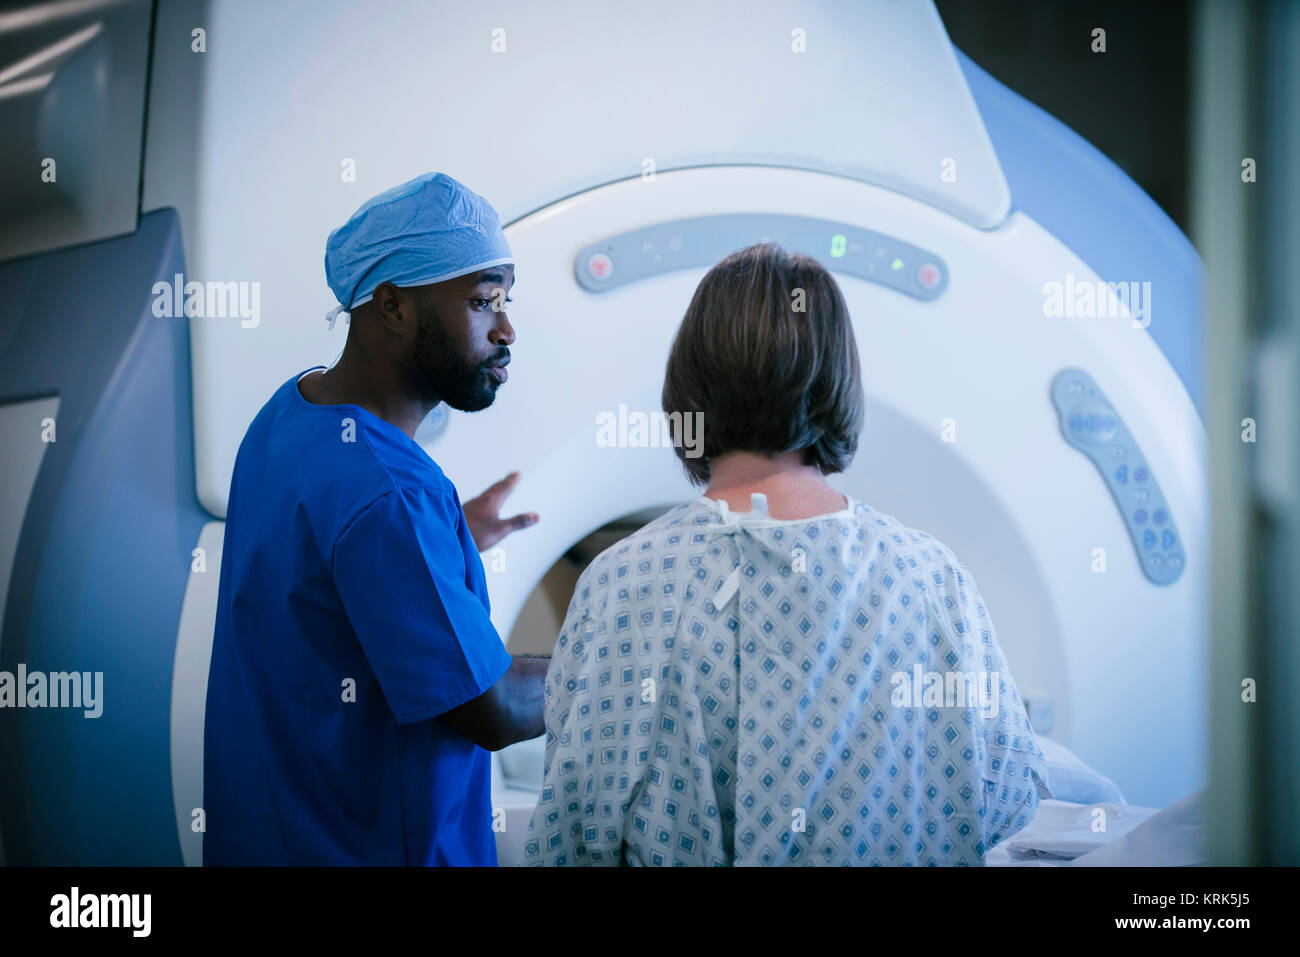 Technician talking to patient at scanner Stock Photo